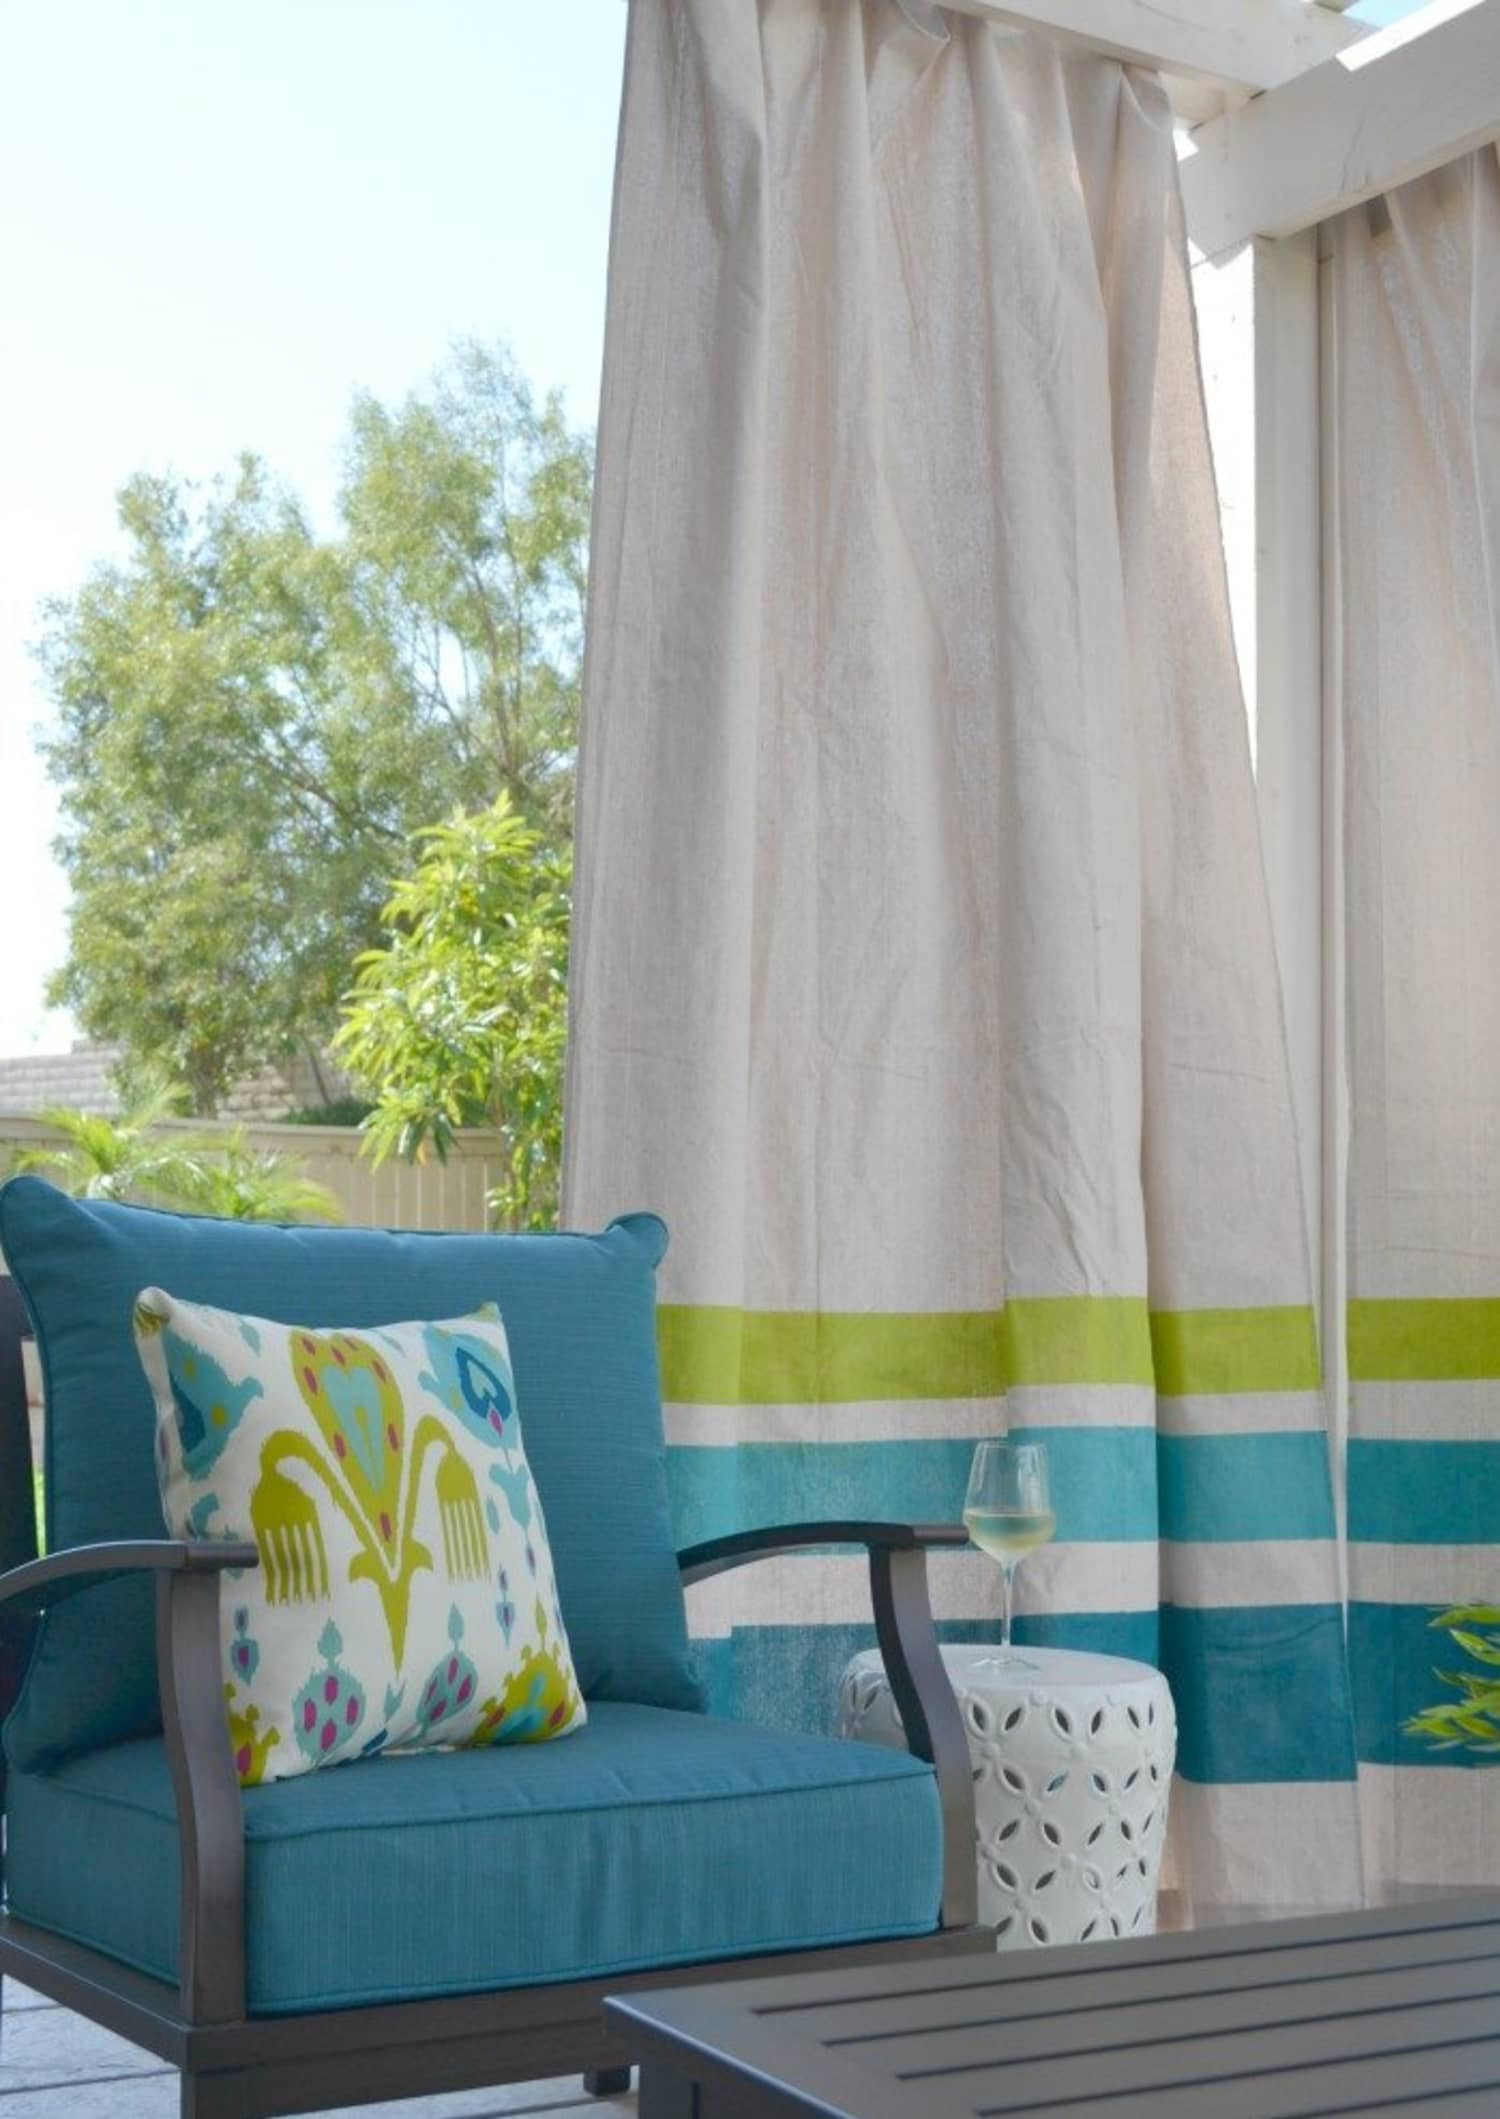 DIY Outdoor Curtains
 DIY These Easy Drop Cloth Outdoor Curtains For Under $50